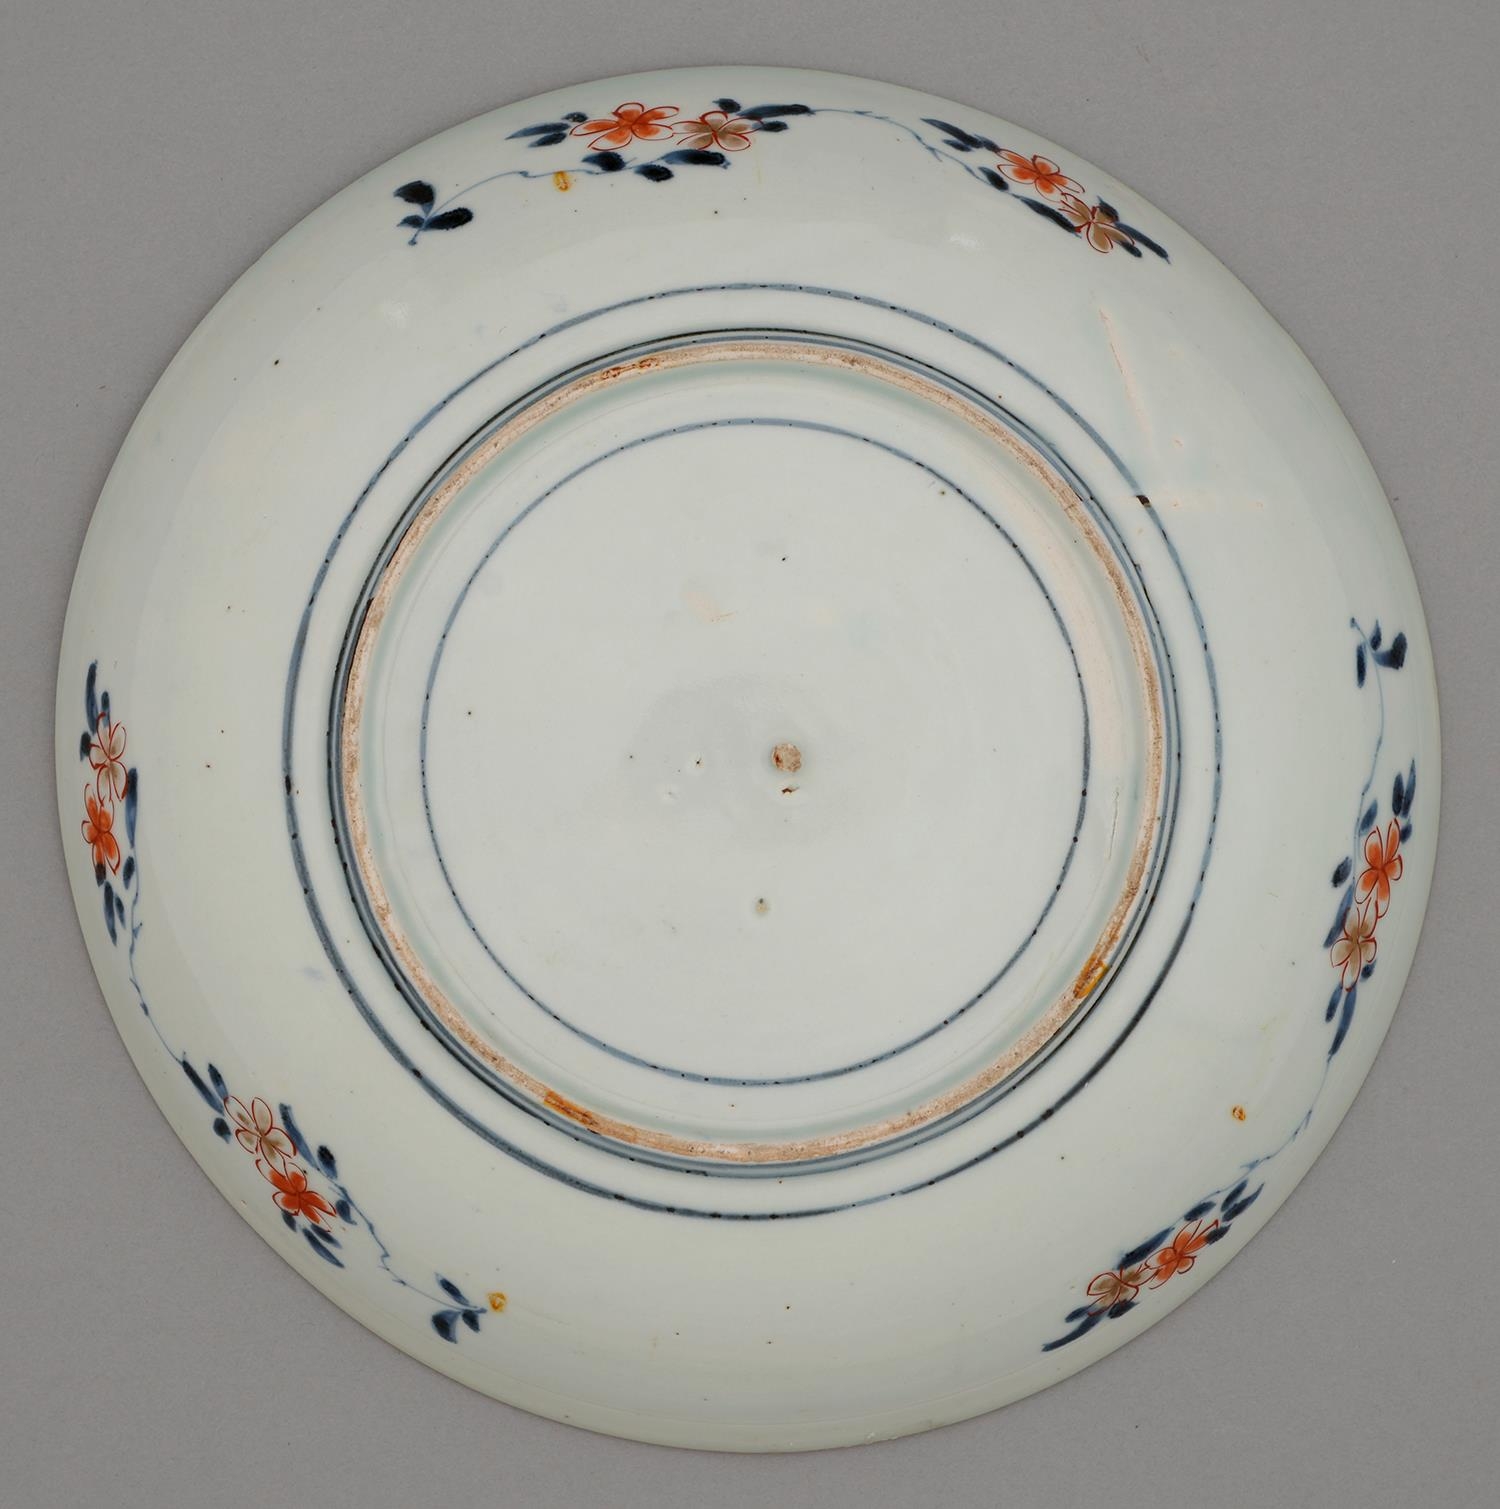 An Imari dish, Edo period, 19th c, painted in underglaze blue and enamelled in red and gilt with - Image 2 of 2